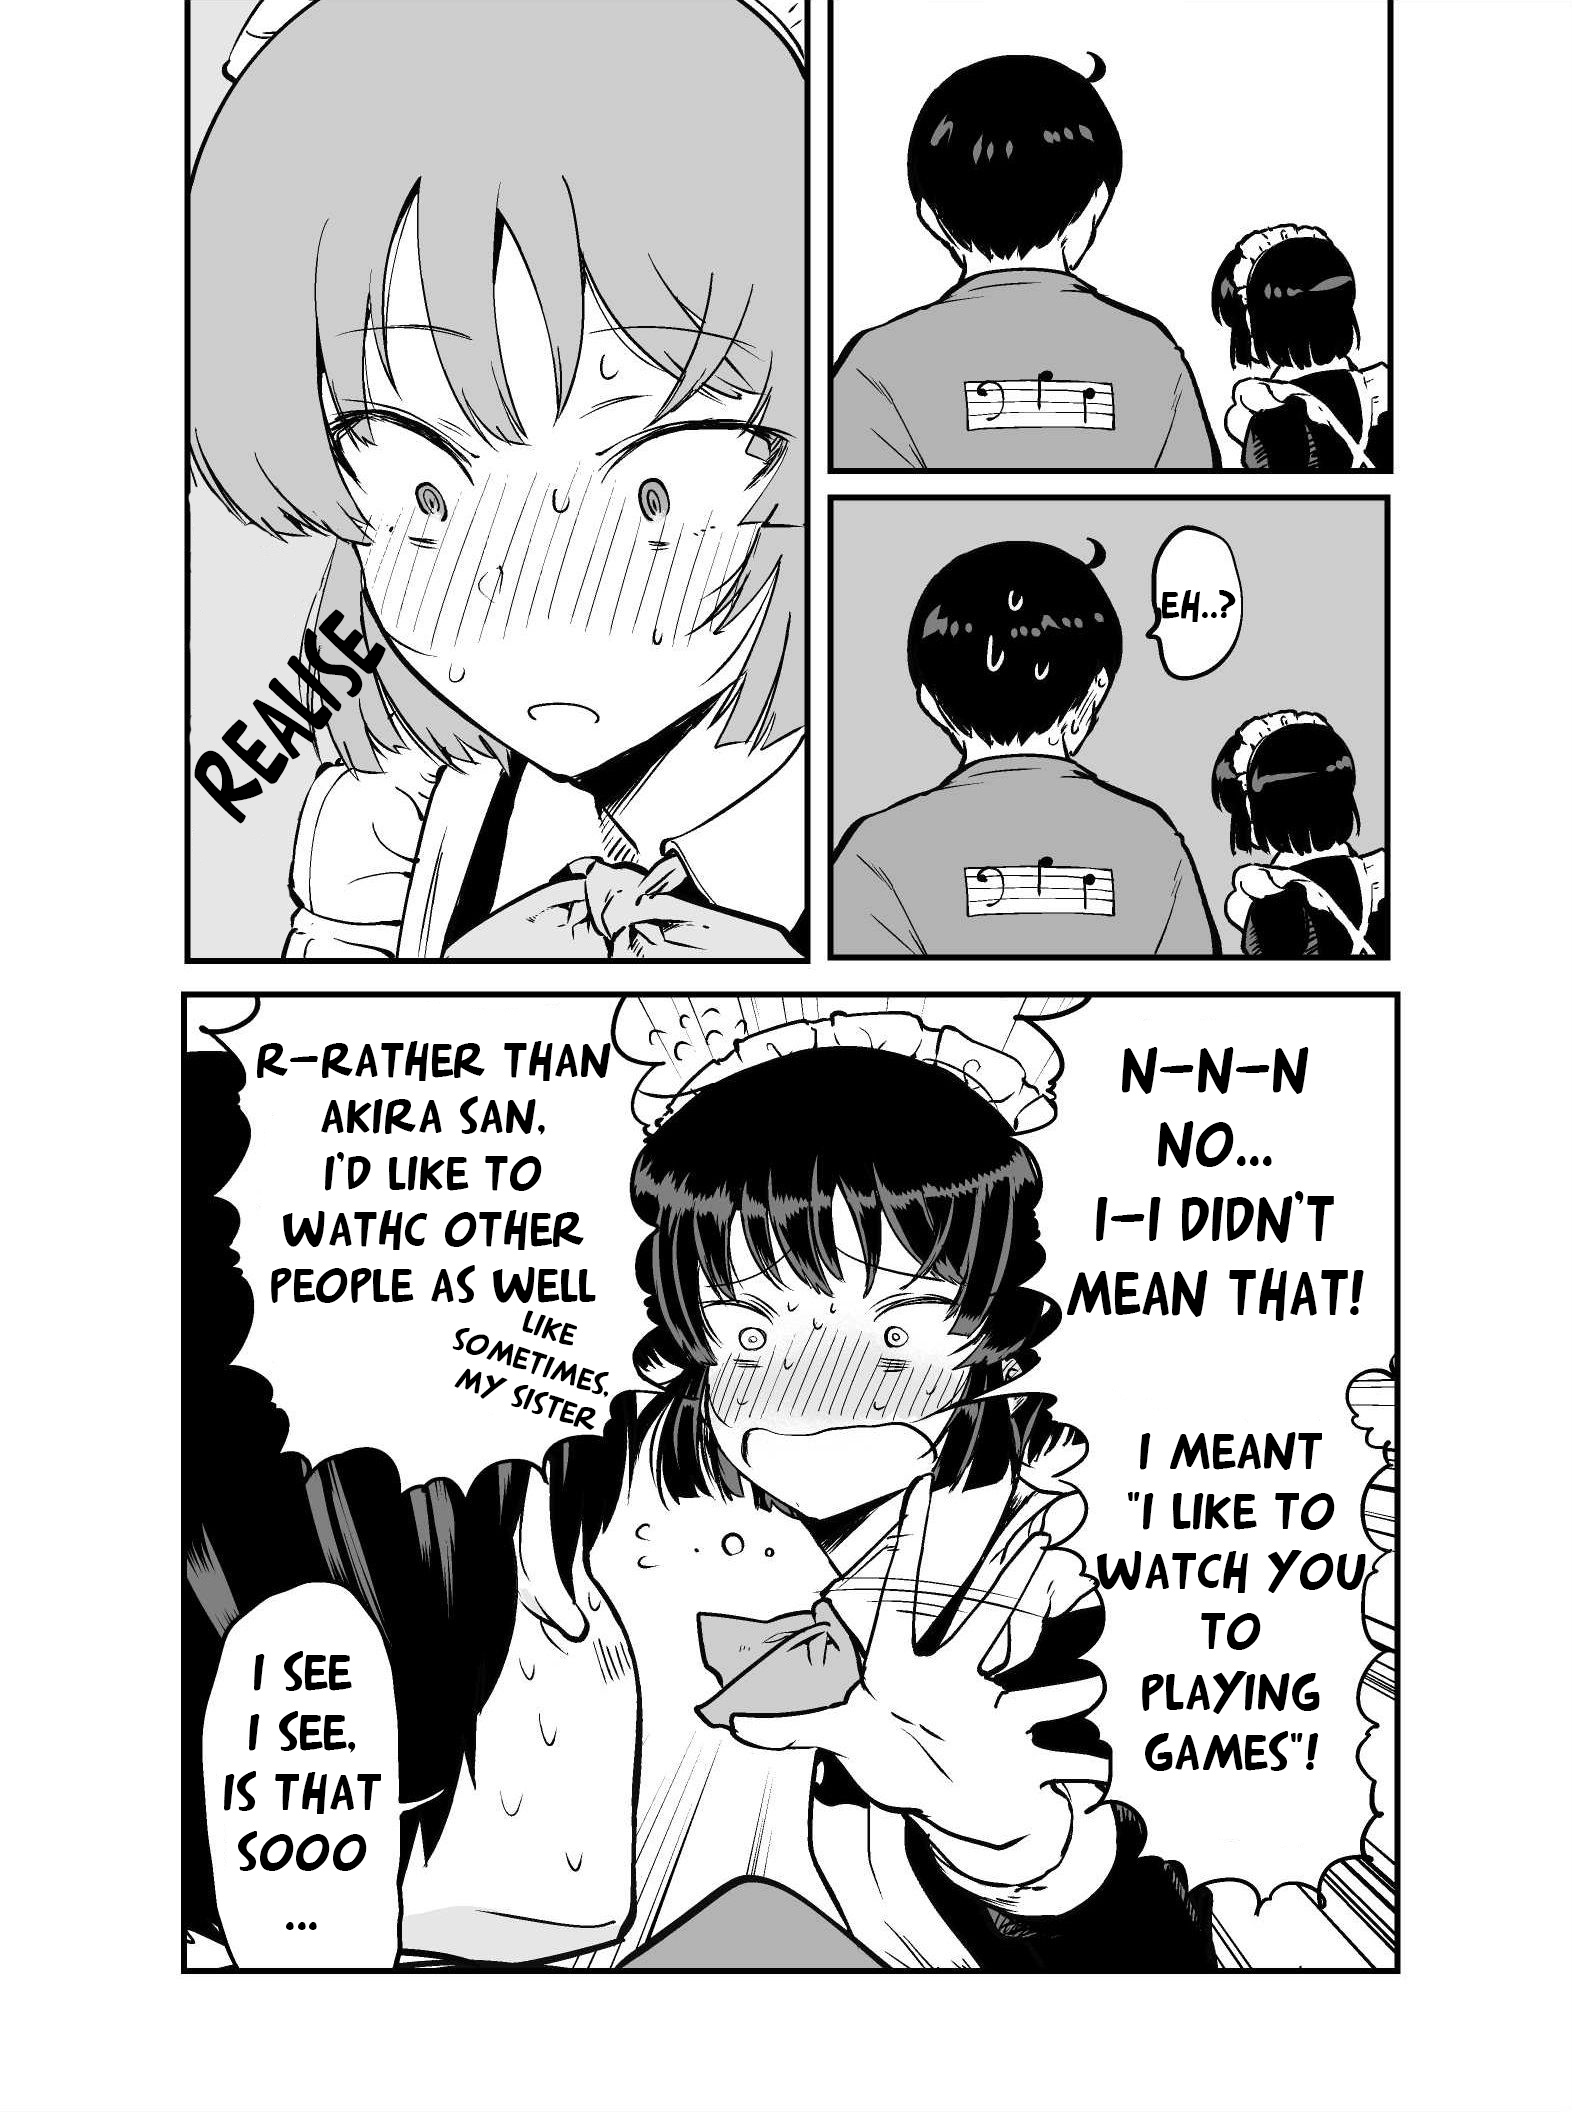 The Maid Who Can't Hide Her Feelings - Page 3